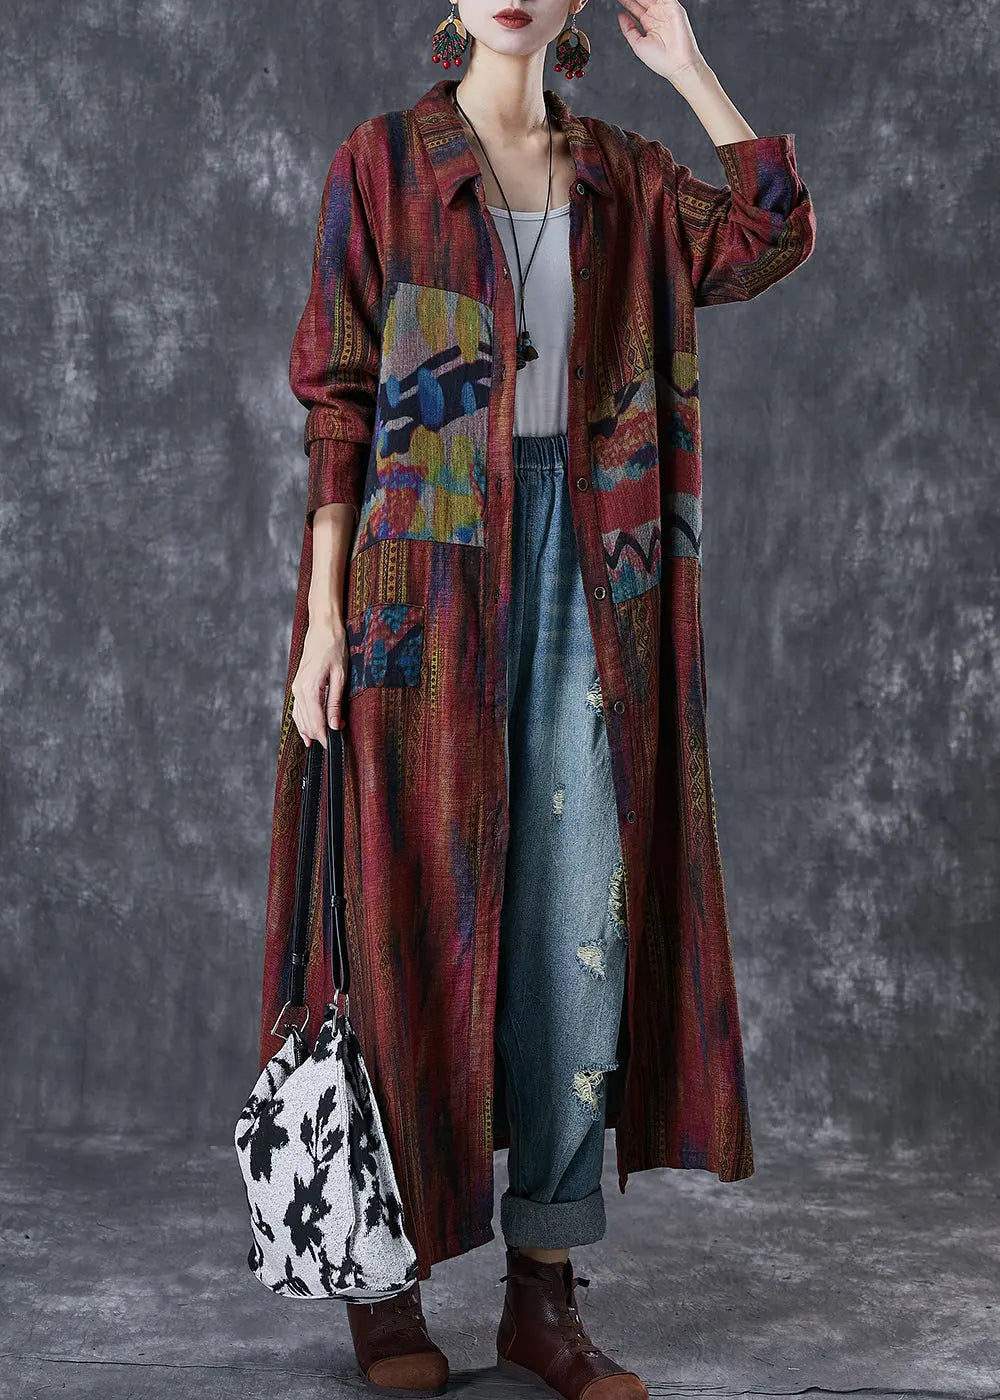 Women Dull Red Oversized Print Linen Trench Spring Ada Fashion